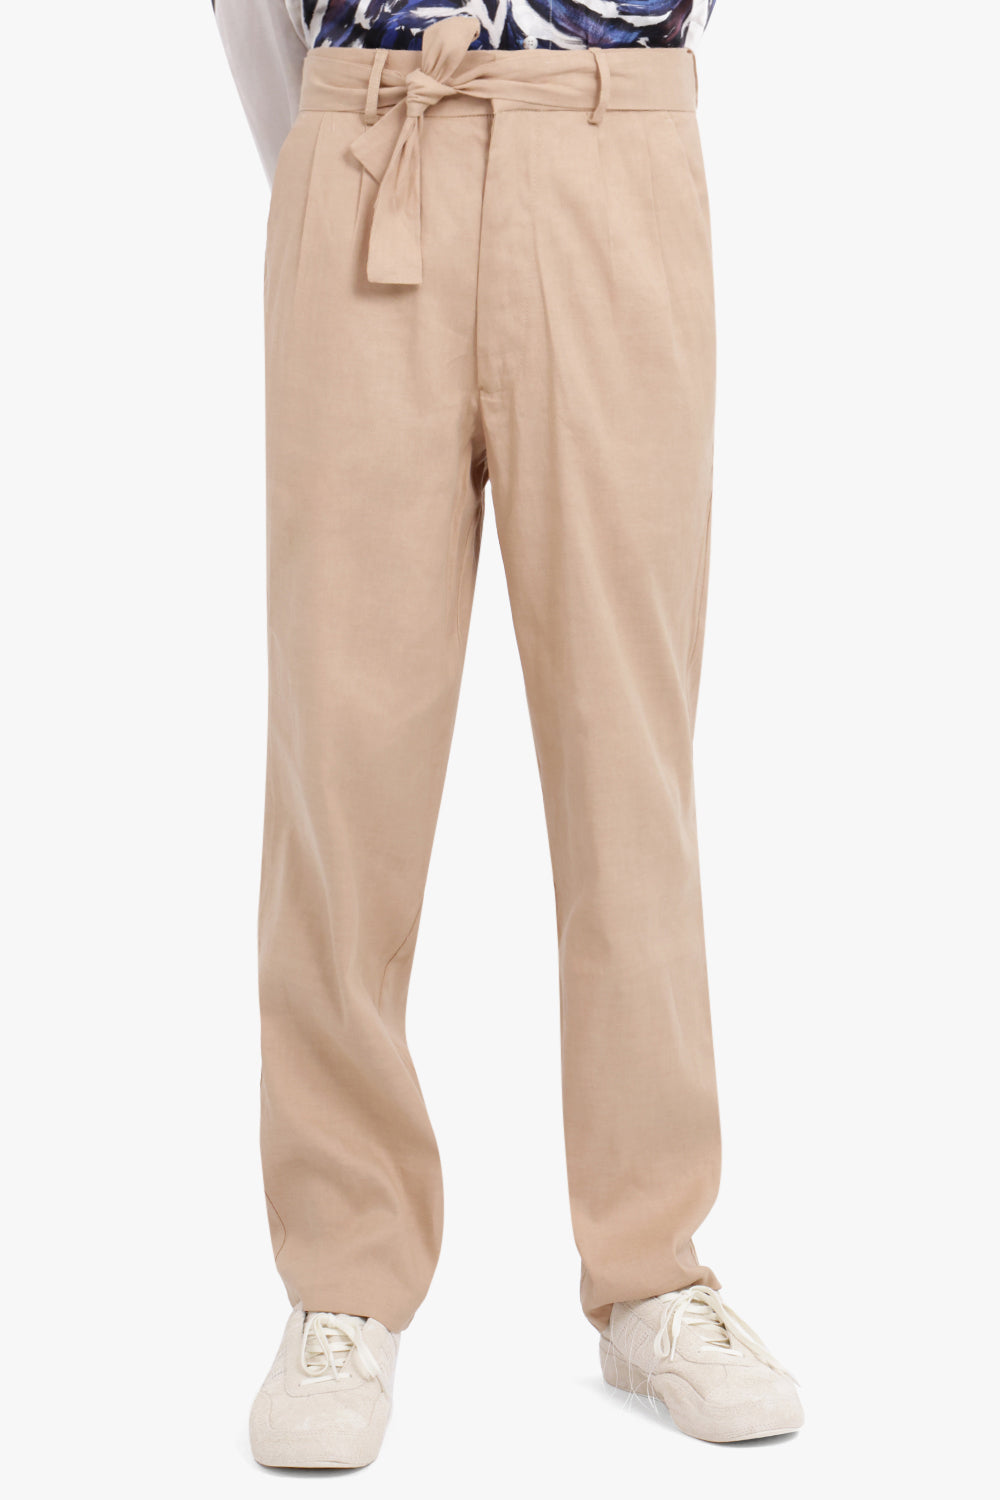 COMMAS RTW TAILORED TROUSERS | WHEAT